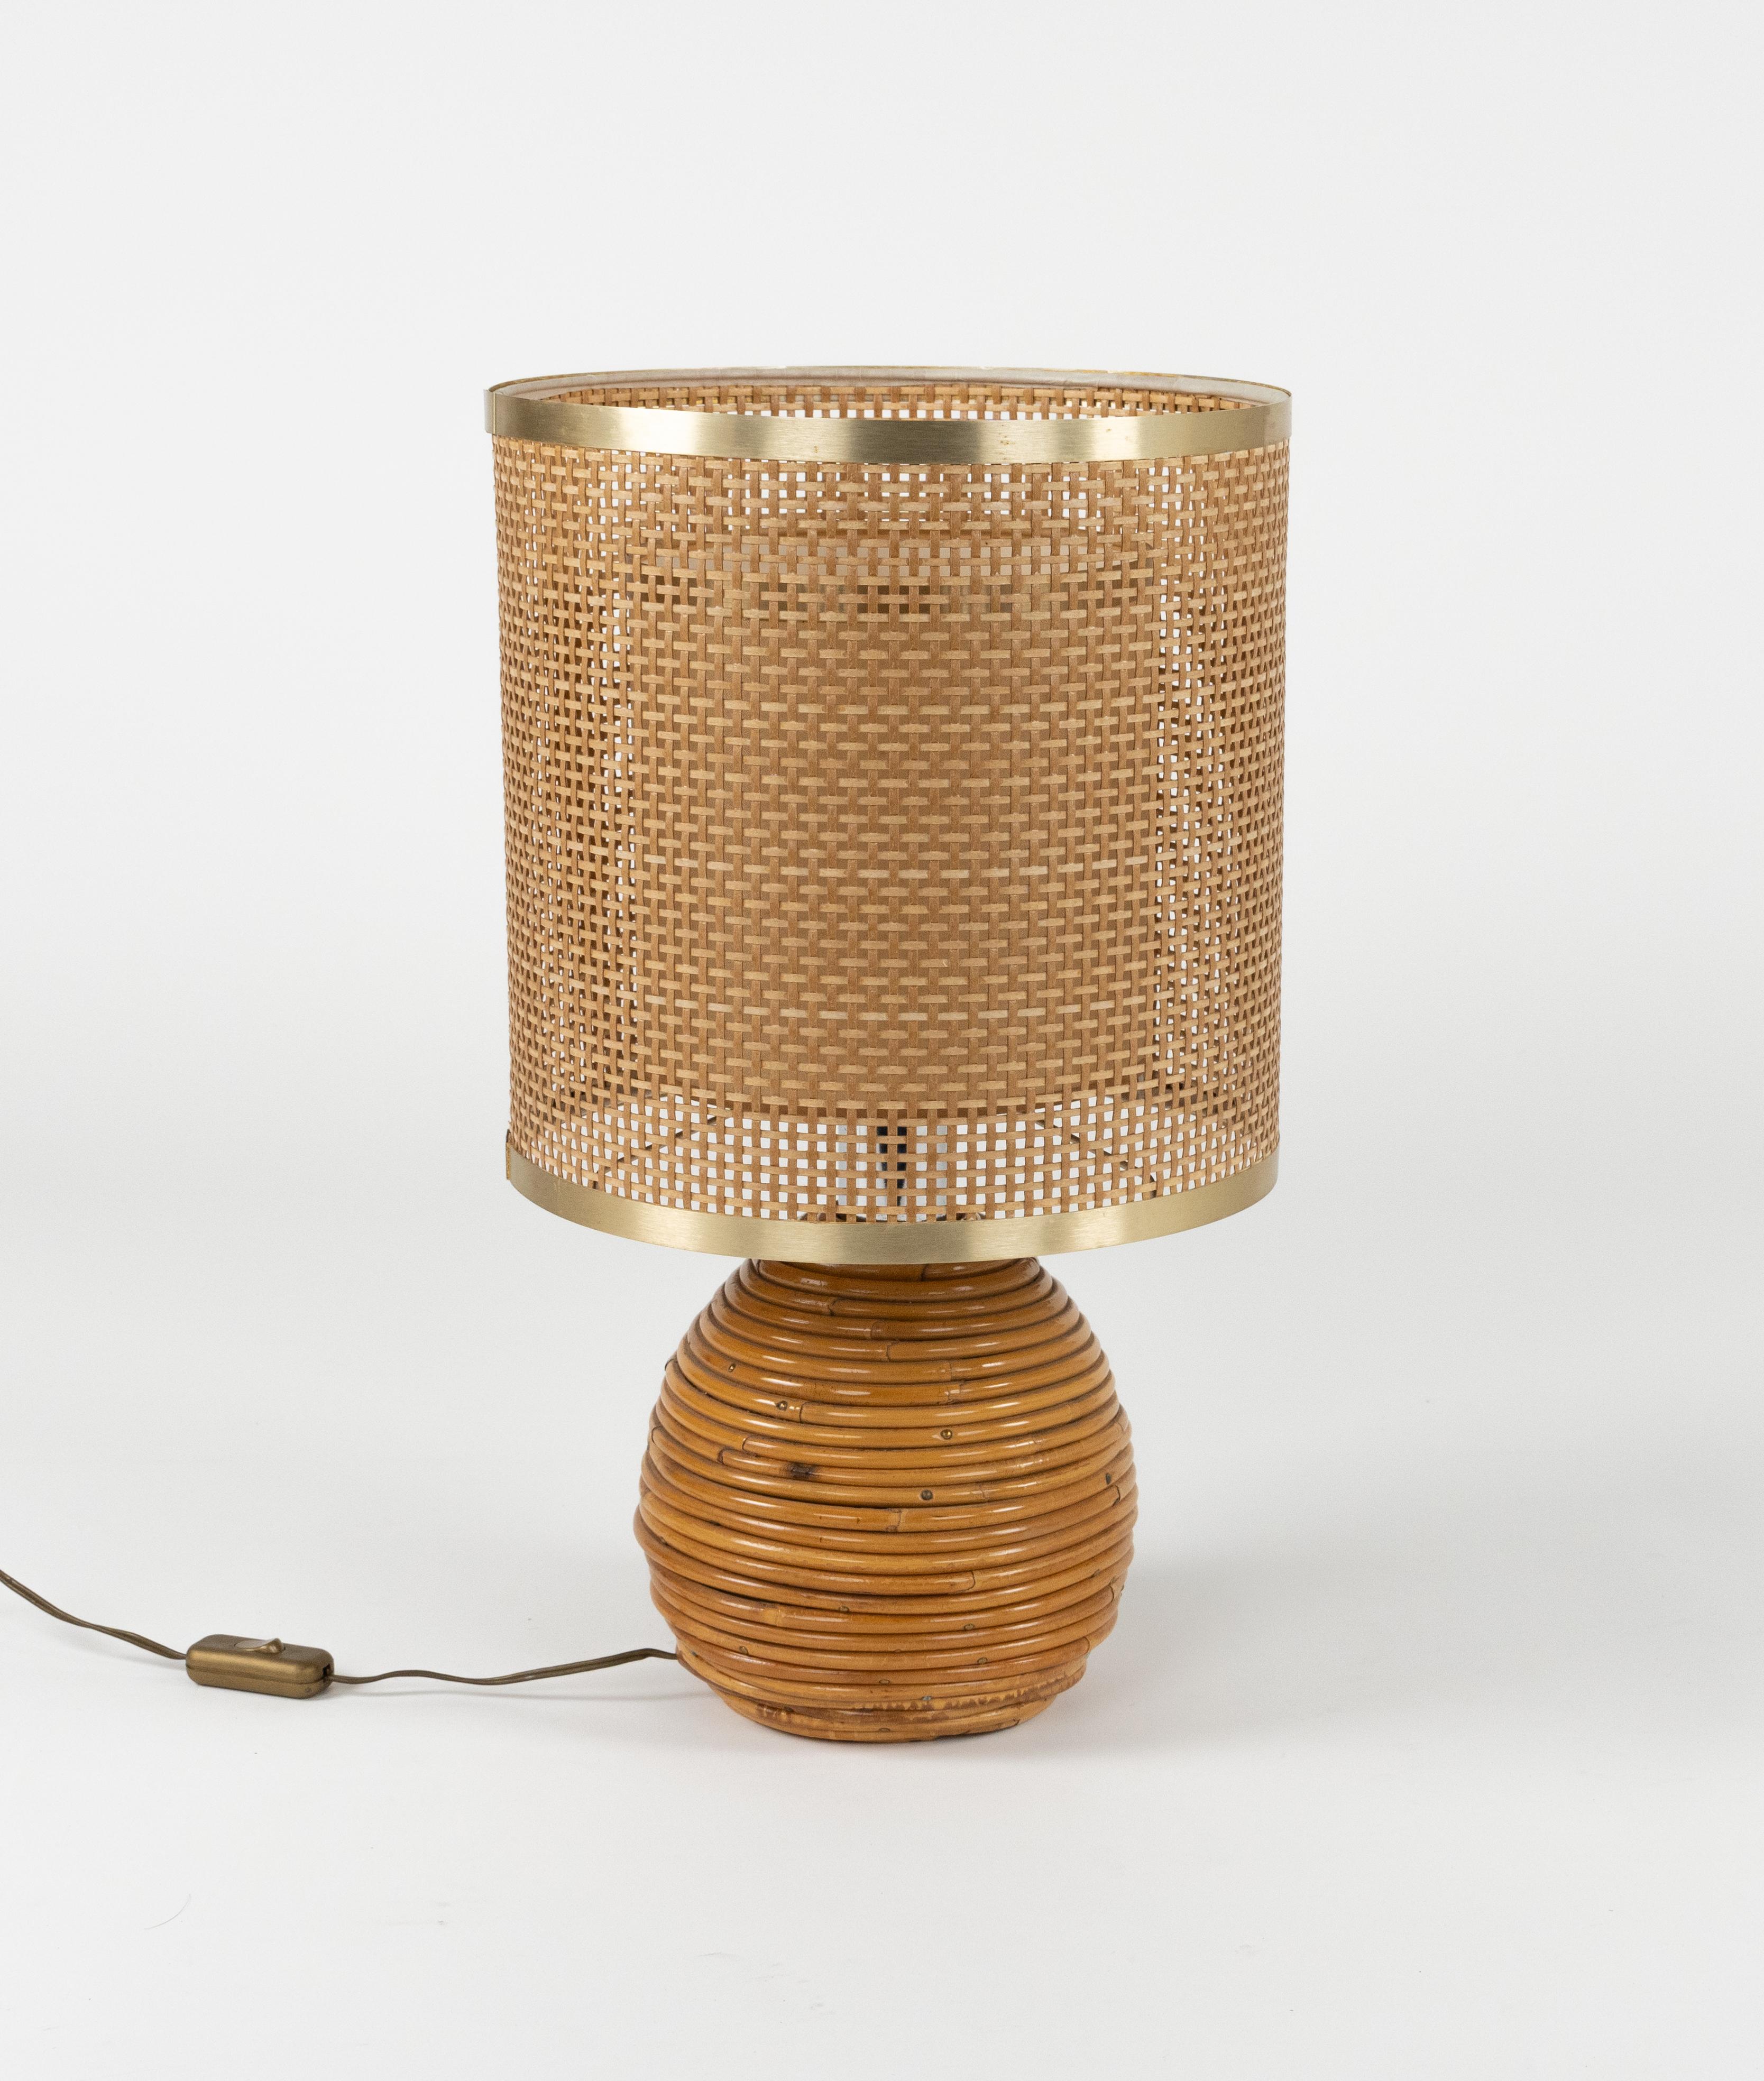 Metal Midcentury Rattan, Wicker and Chrome Table Lamp by Vivai Del Sud, Italy 1970s